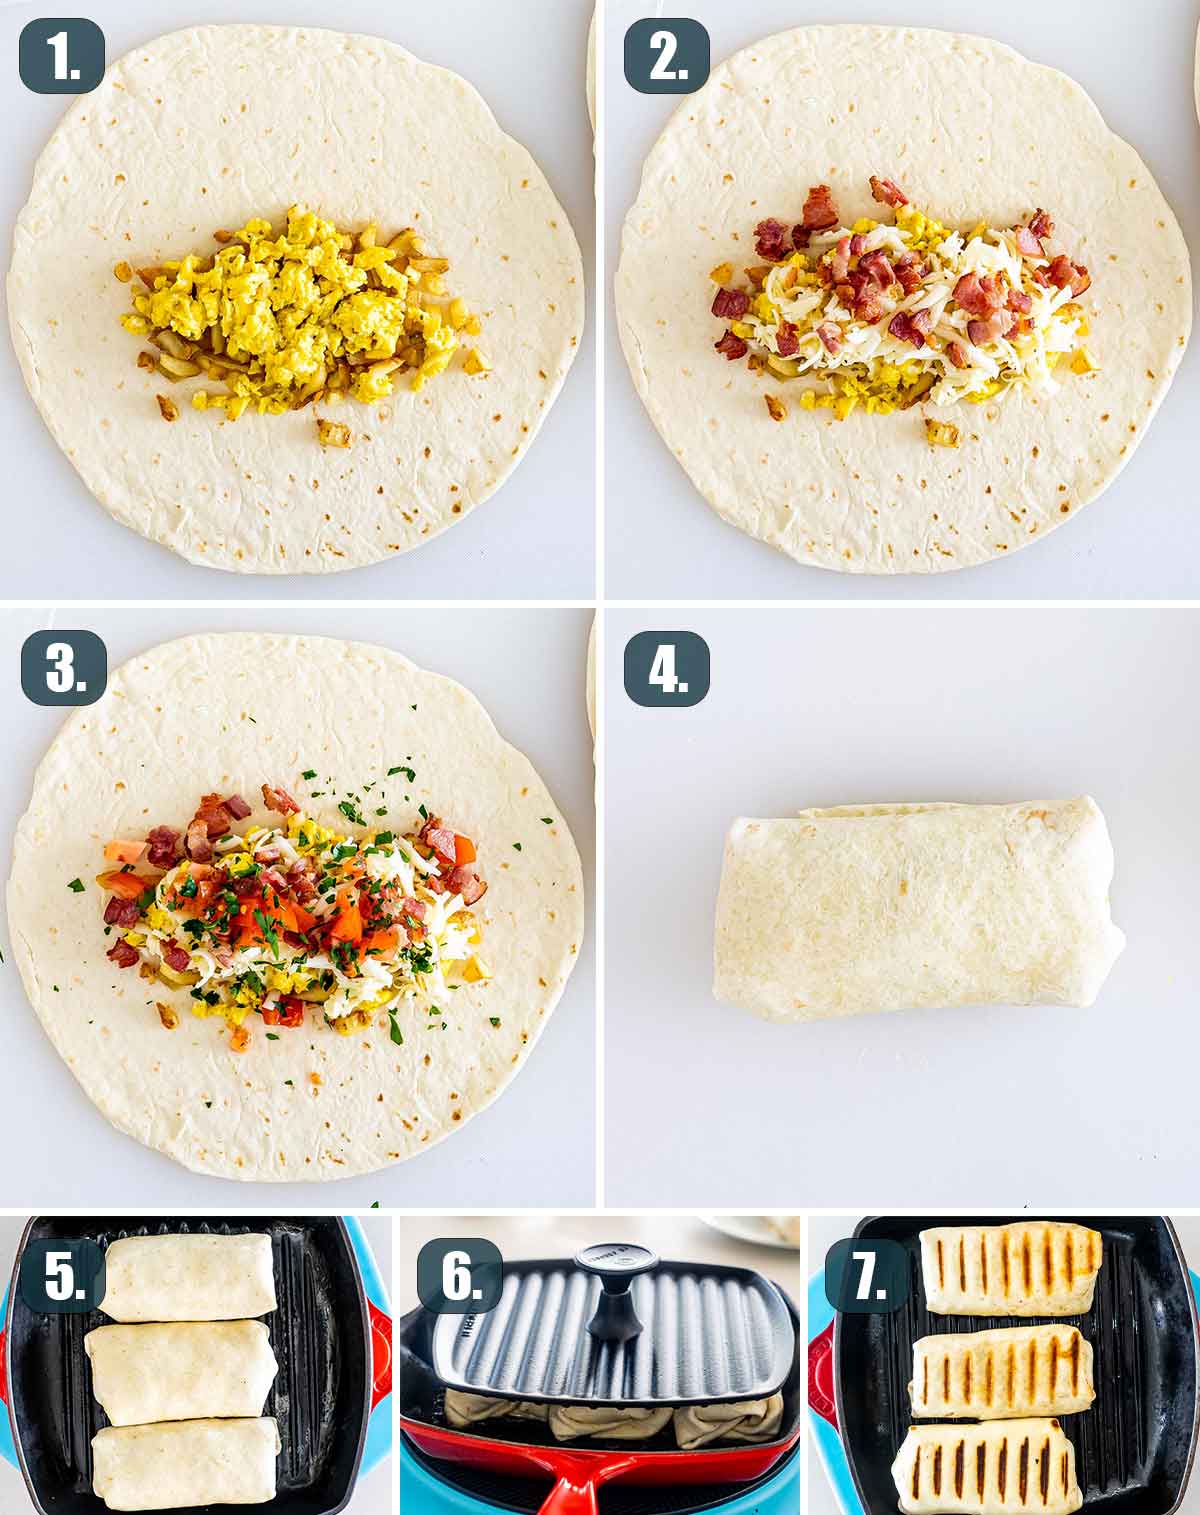 process shots showing how to assemble breakfast burritos and how to toast them.